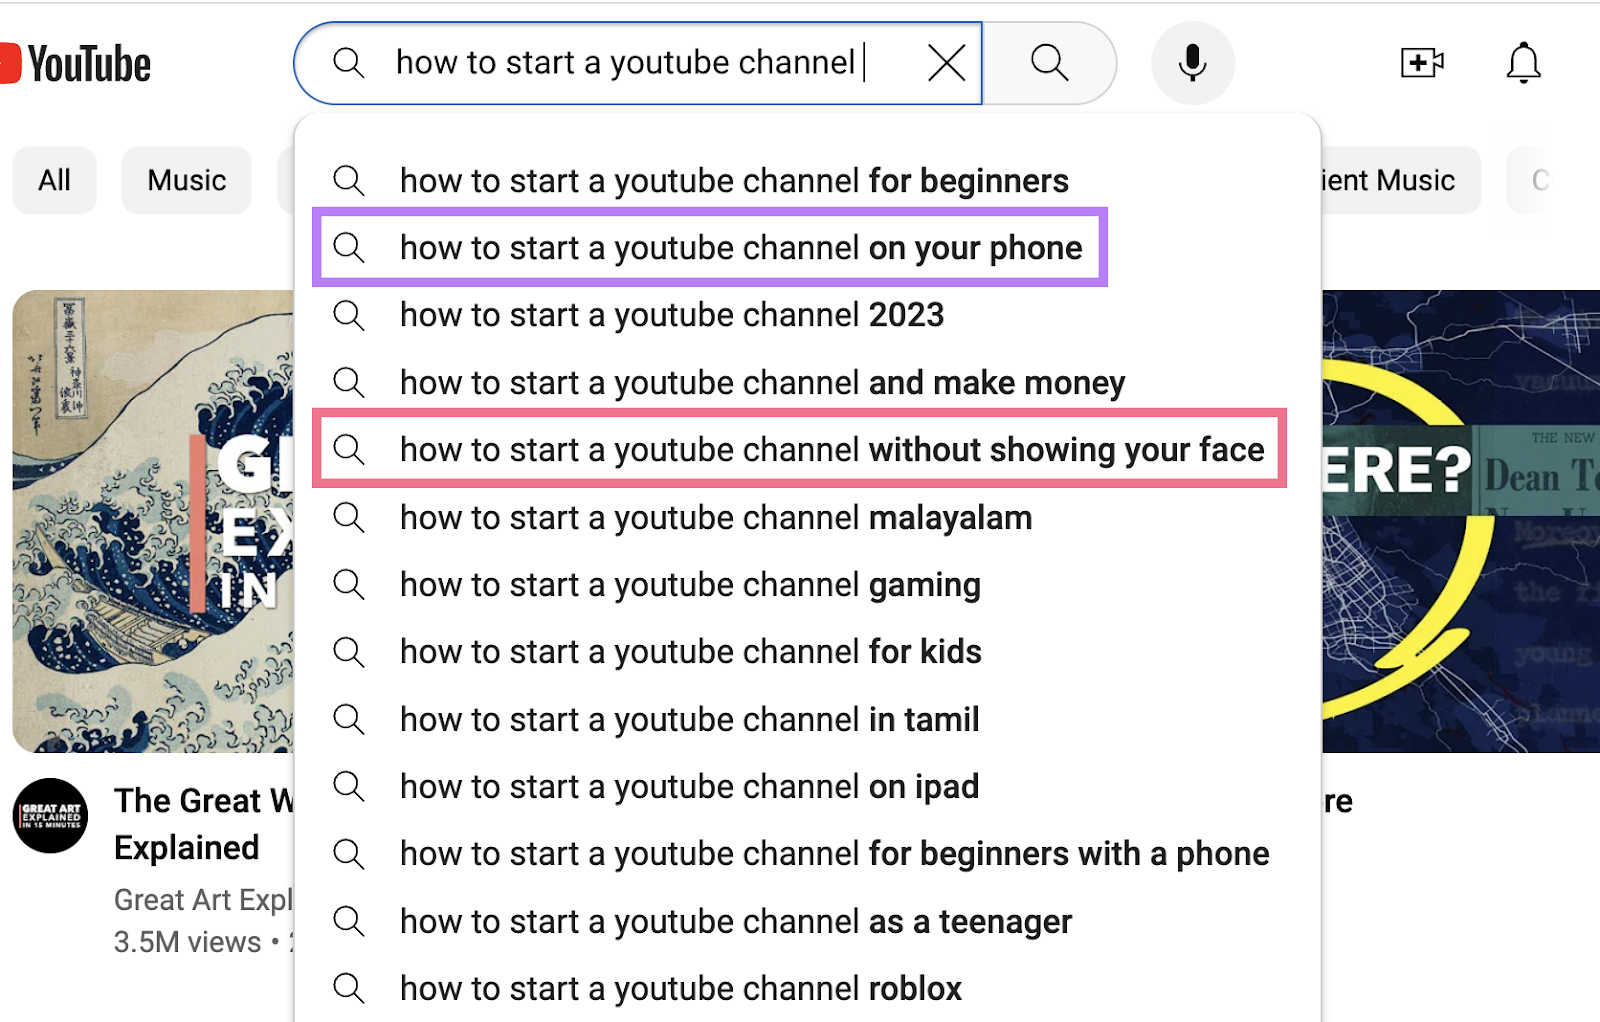 YouTube search suggestions for “how to start a youtube channel”